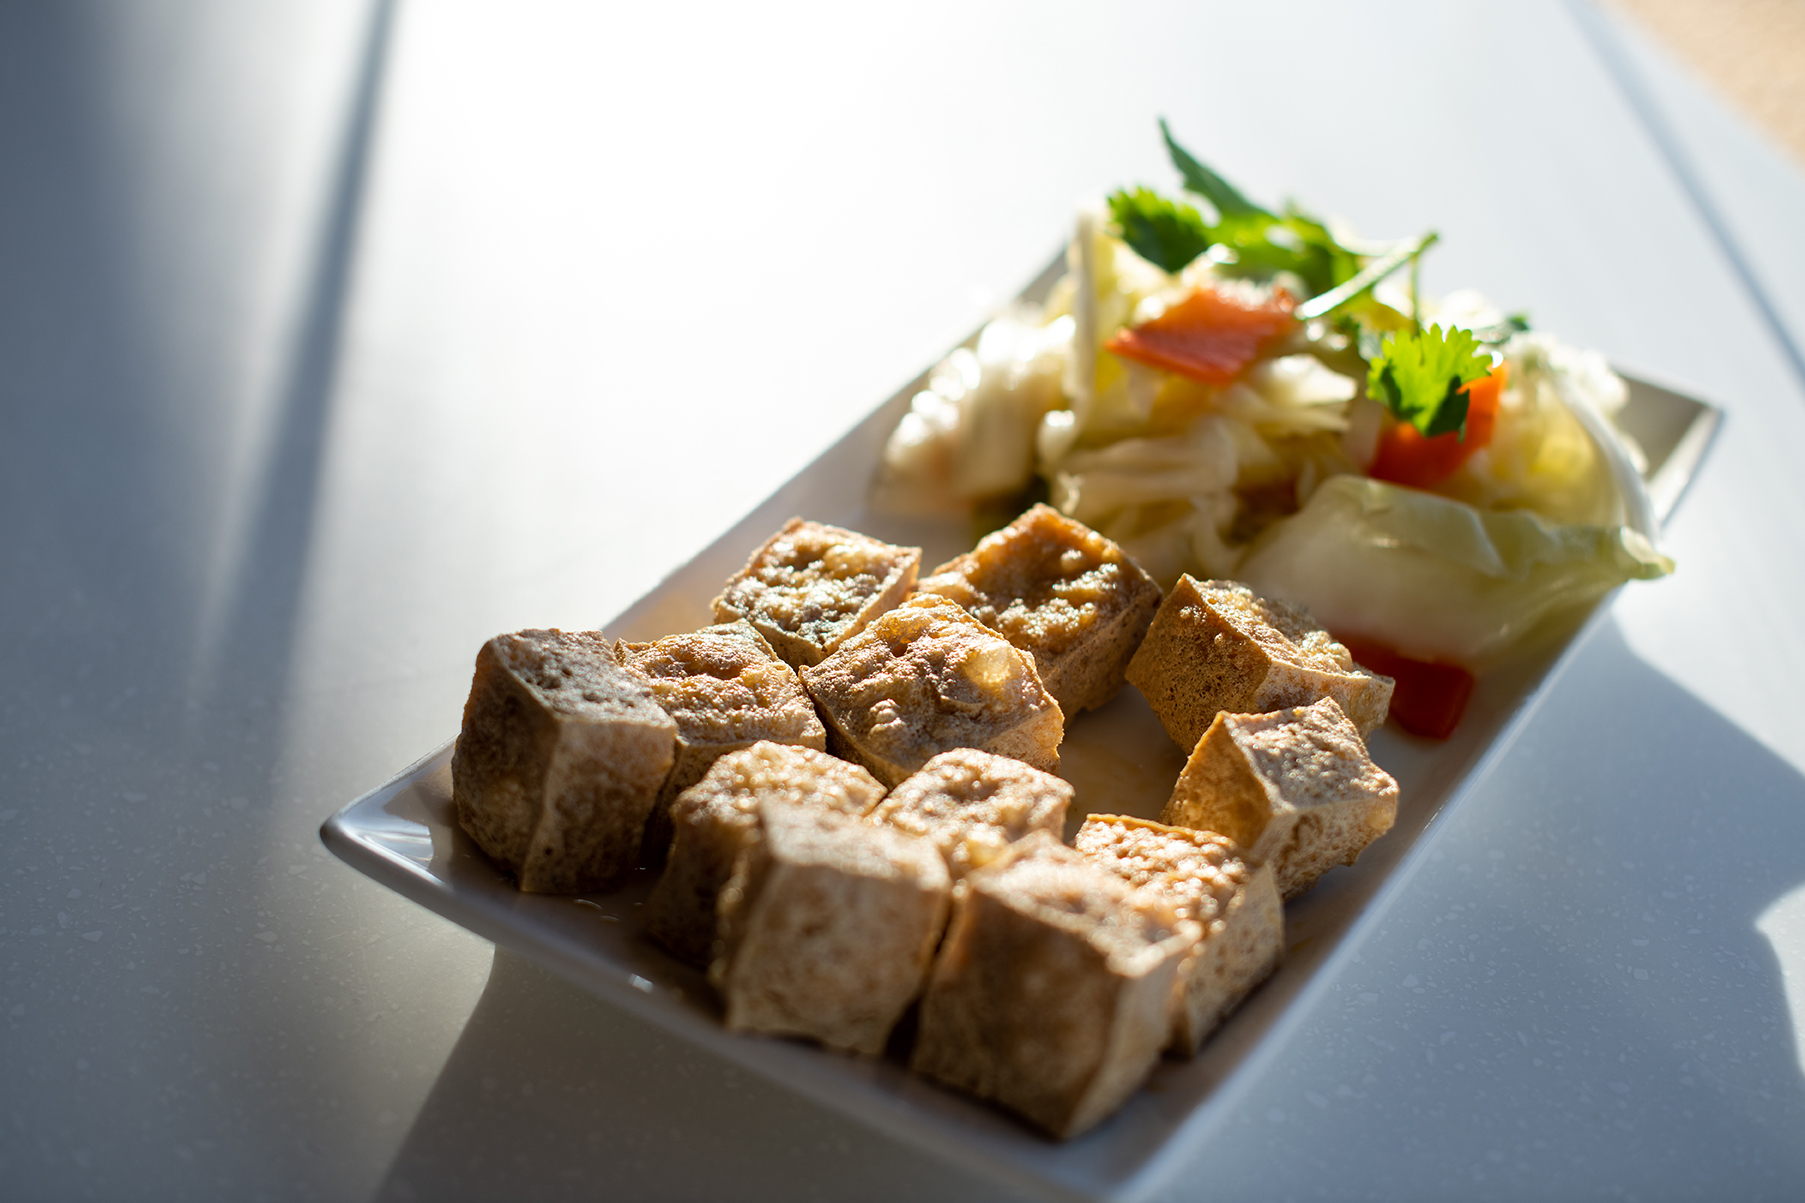 A plate of fried stinky tofu with a side of pickled cabbage on a white countertop.